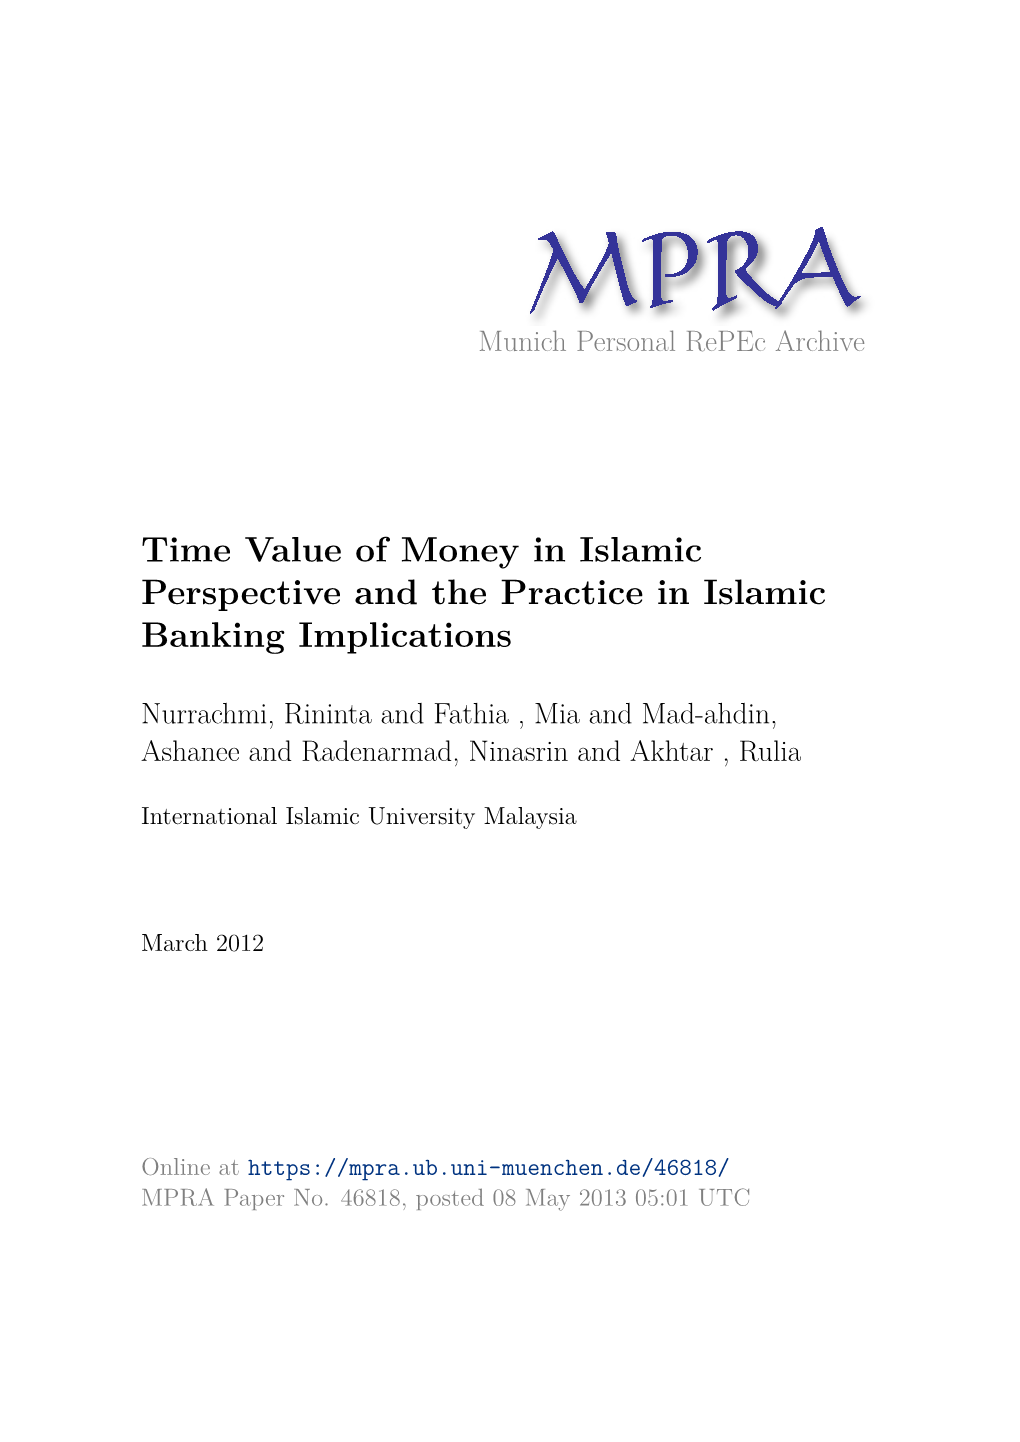 Time Value of Money in Islamic Perspective and the Practice in Islamic Banking Implications